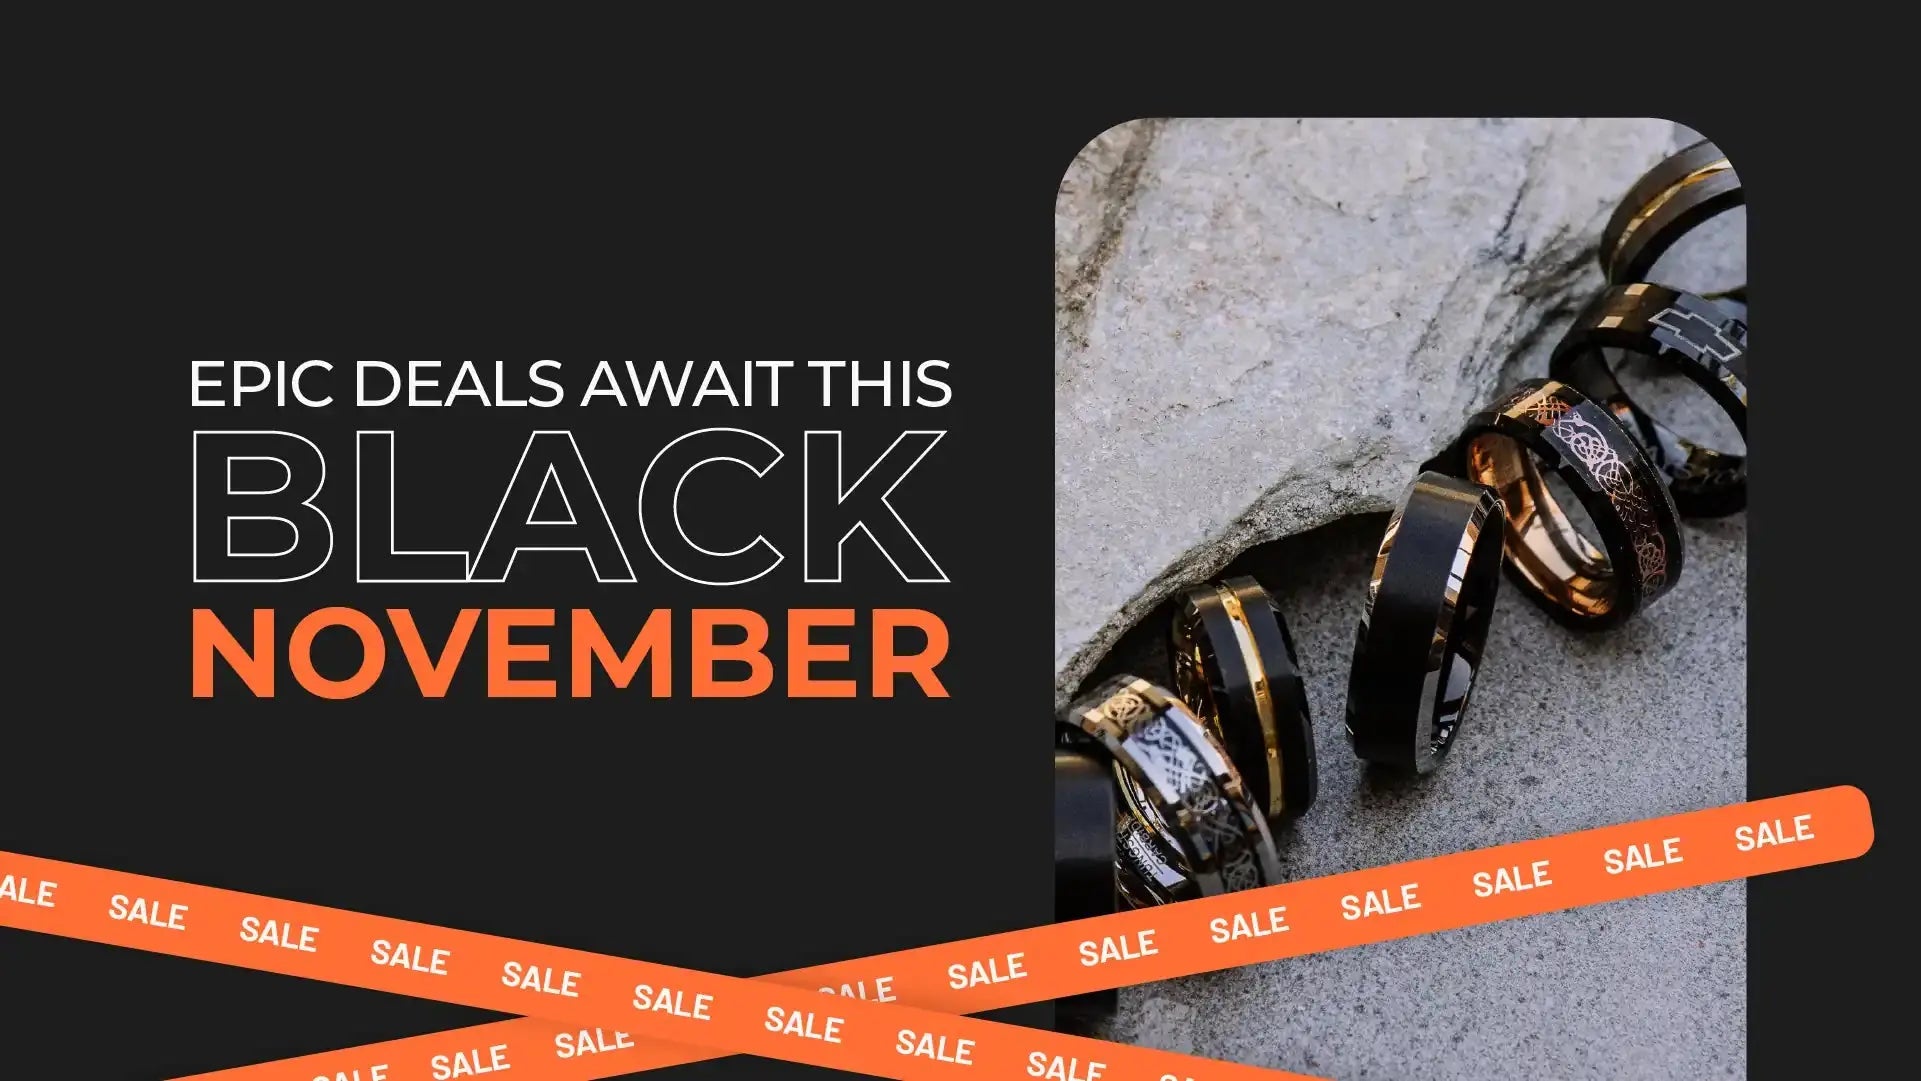 Unleash the Excitement: Black November Deals Are Here! Orbit Rings